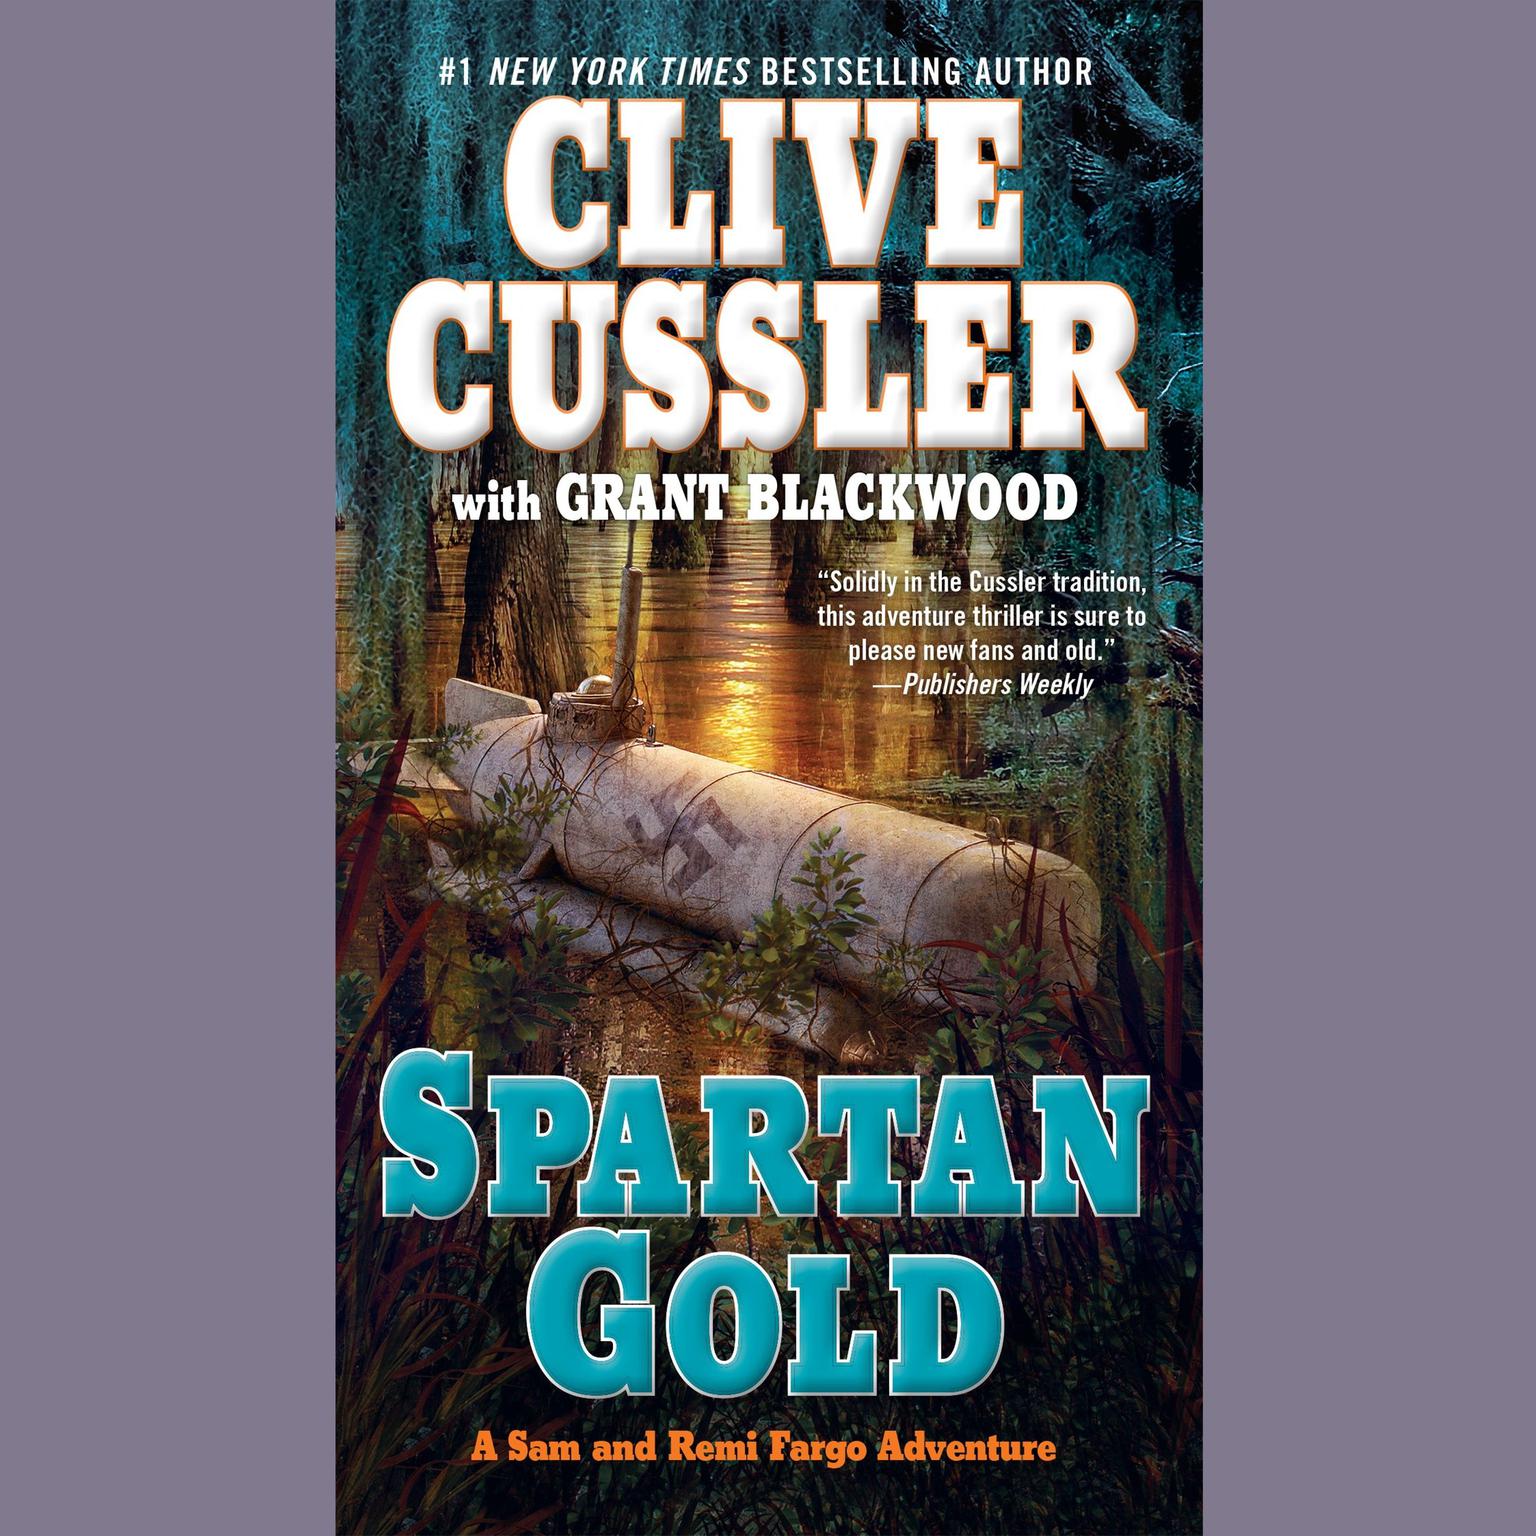 Spartan Gold (Abridged) Audiobook, by Clive Cussler